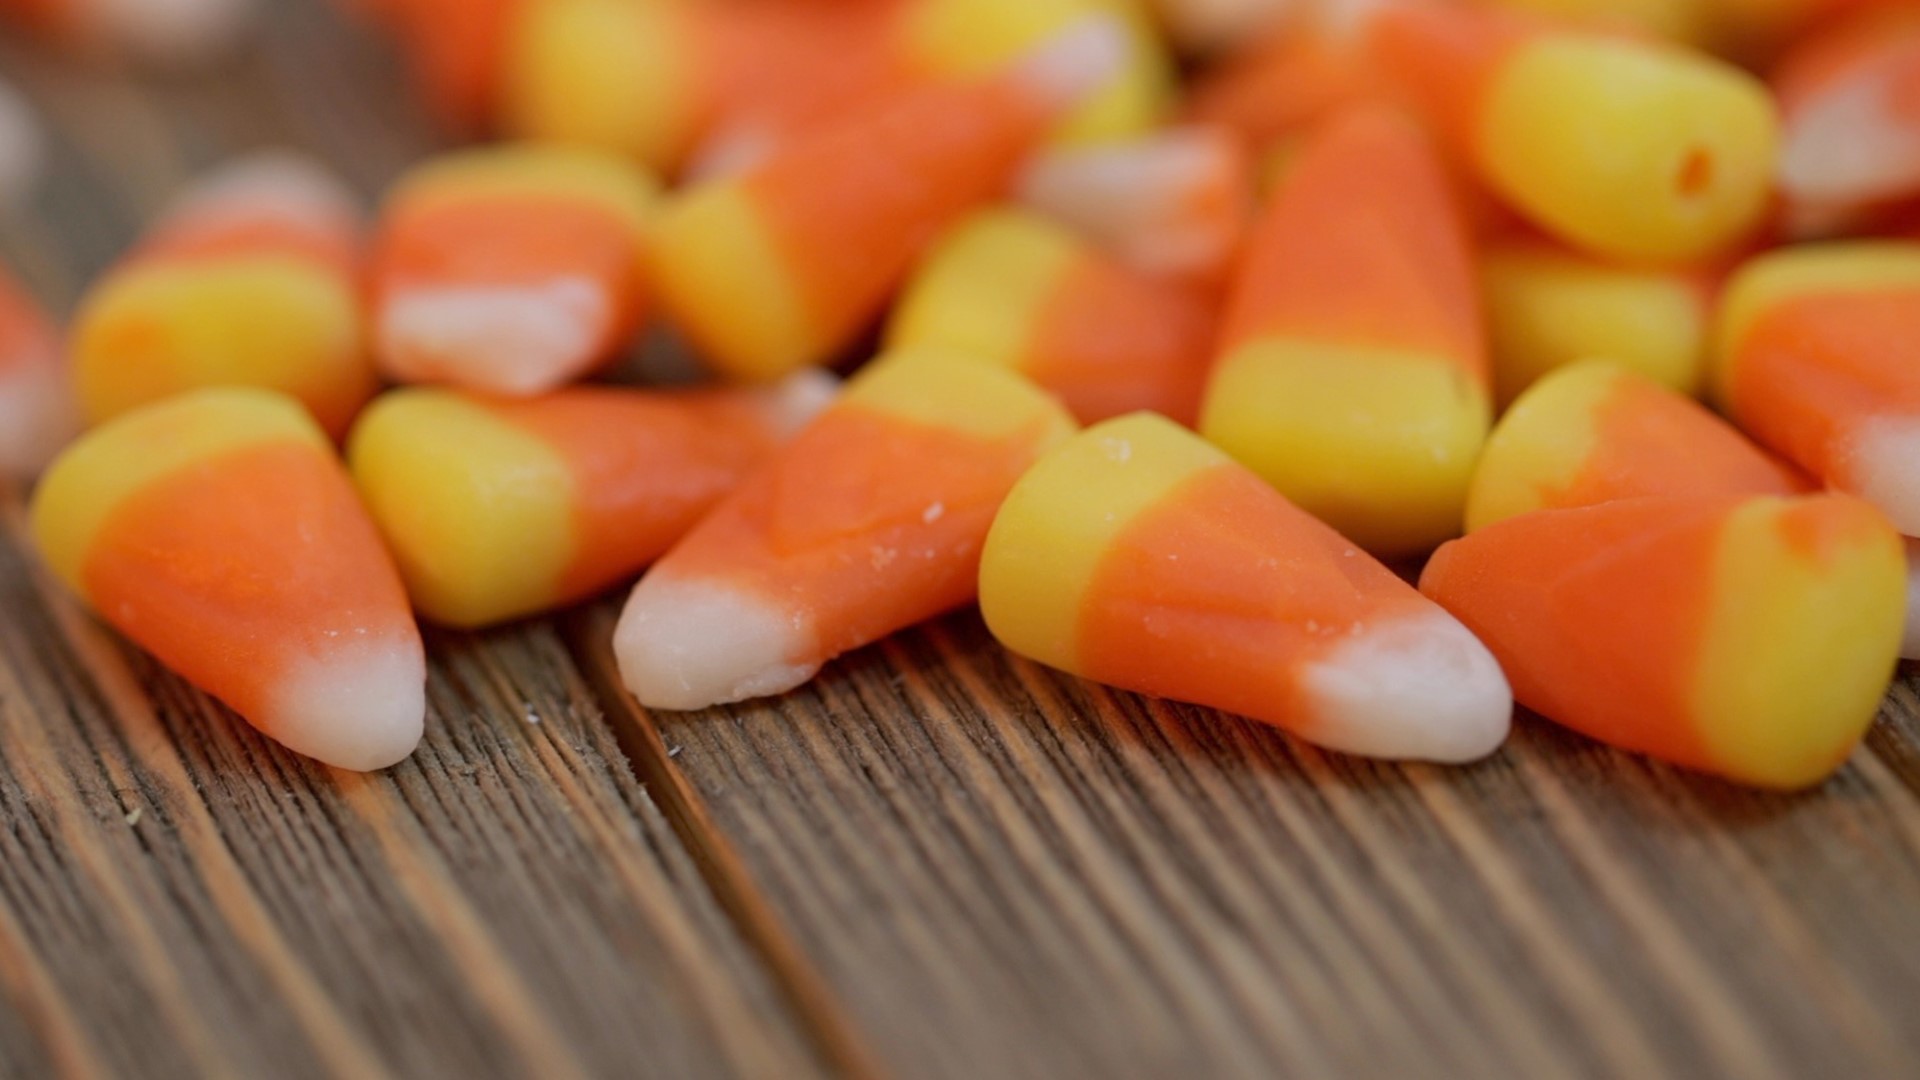 When and Where Was Candy Corn Invented?